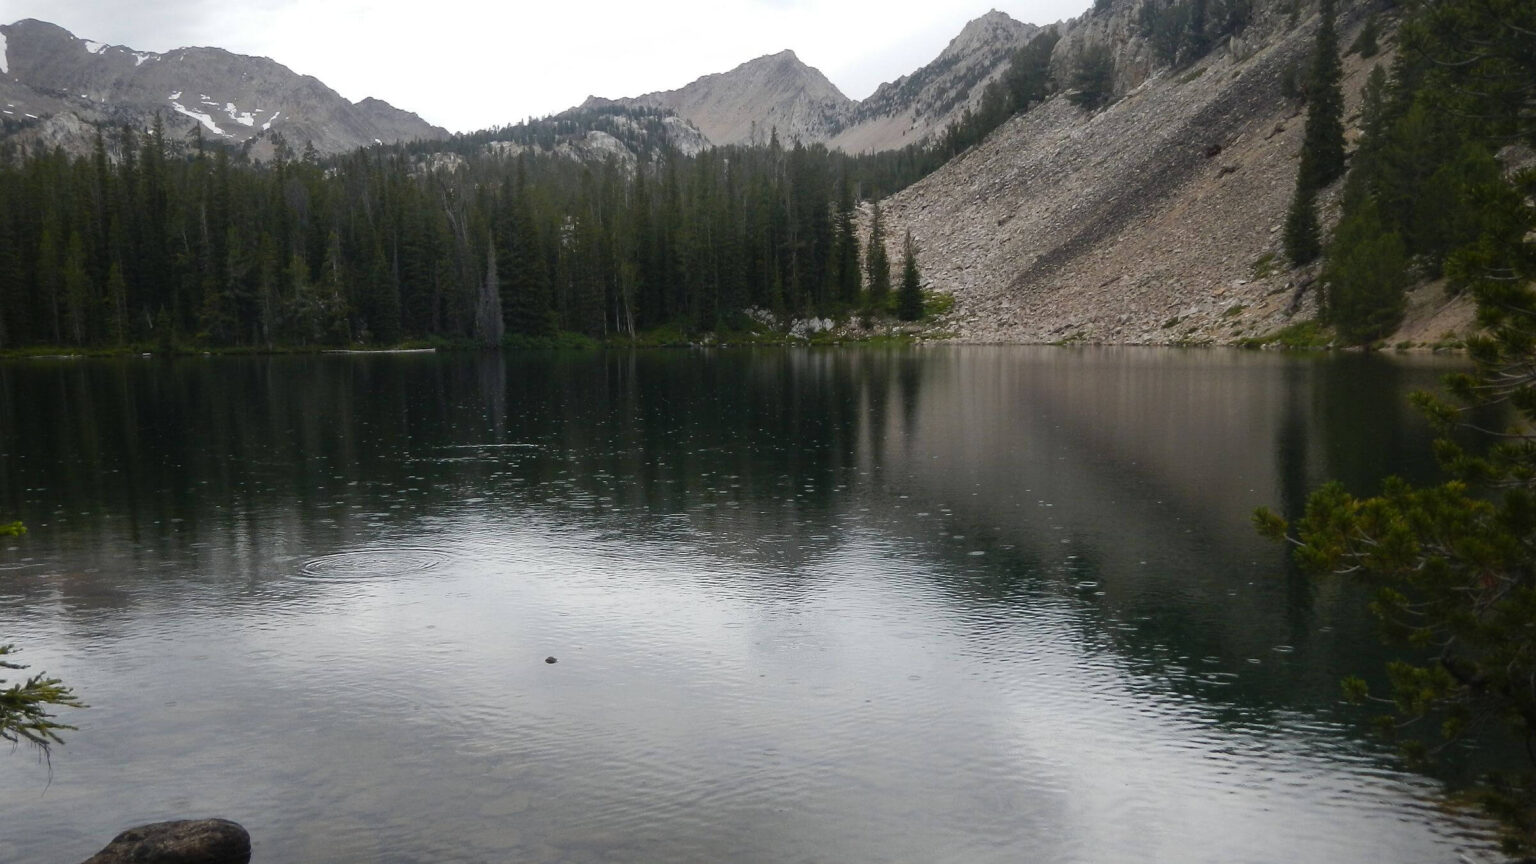 Cecil D. Andrus-White Clouds Wilderness, Lodgepole Lake, August